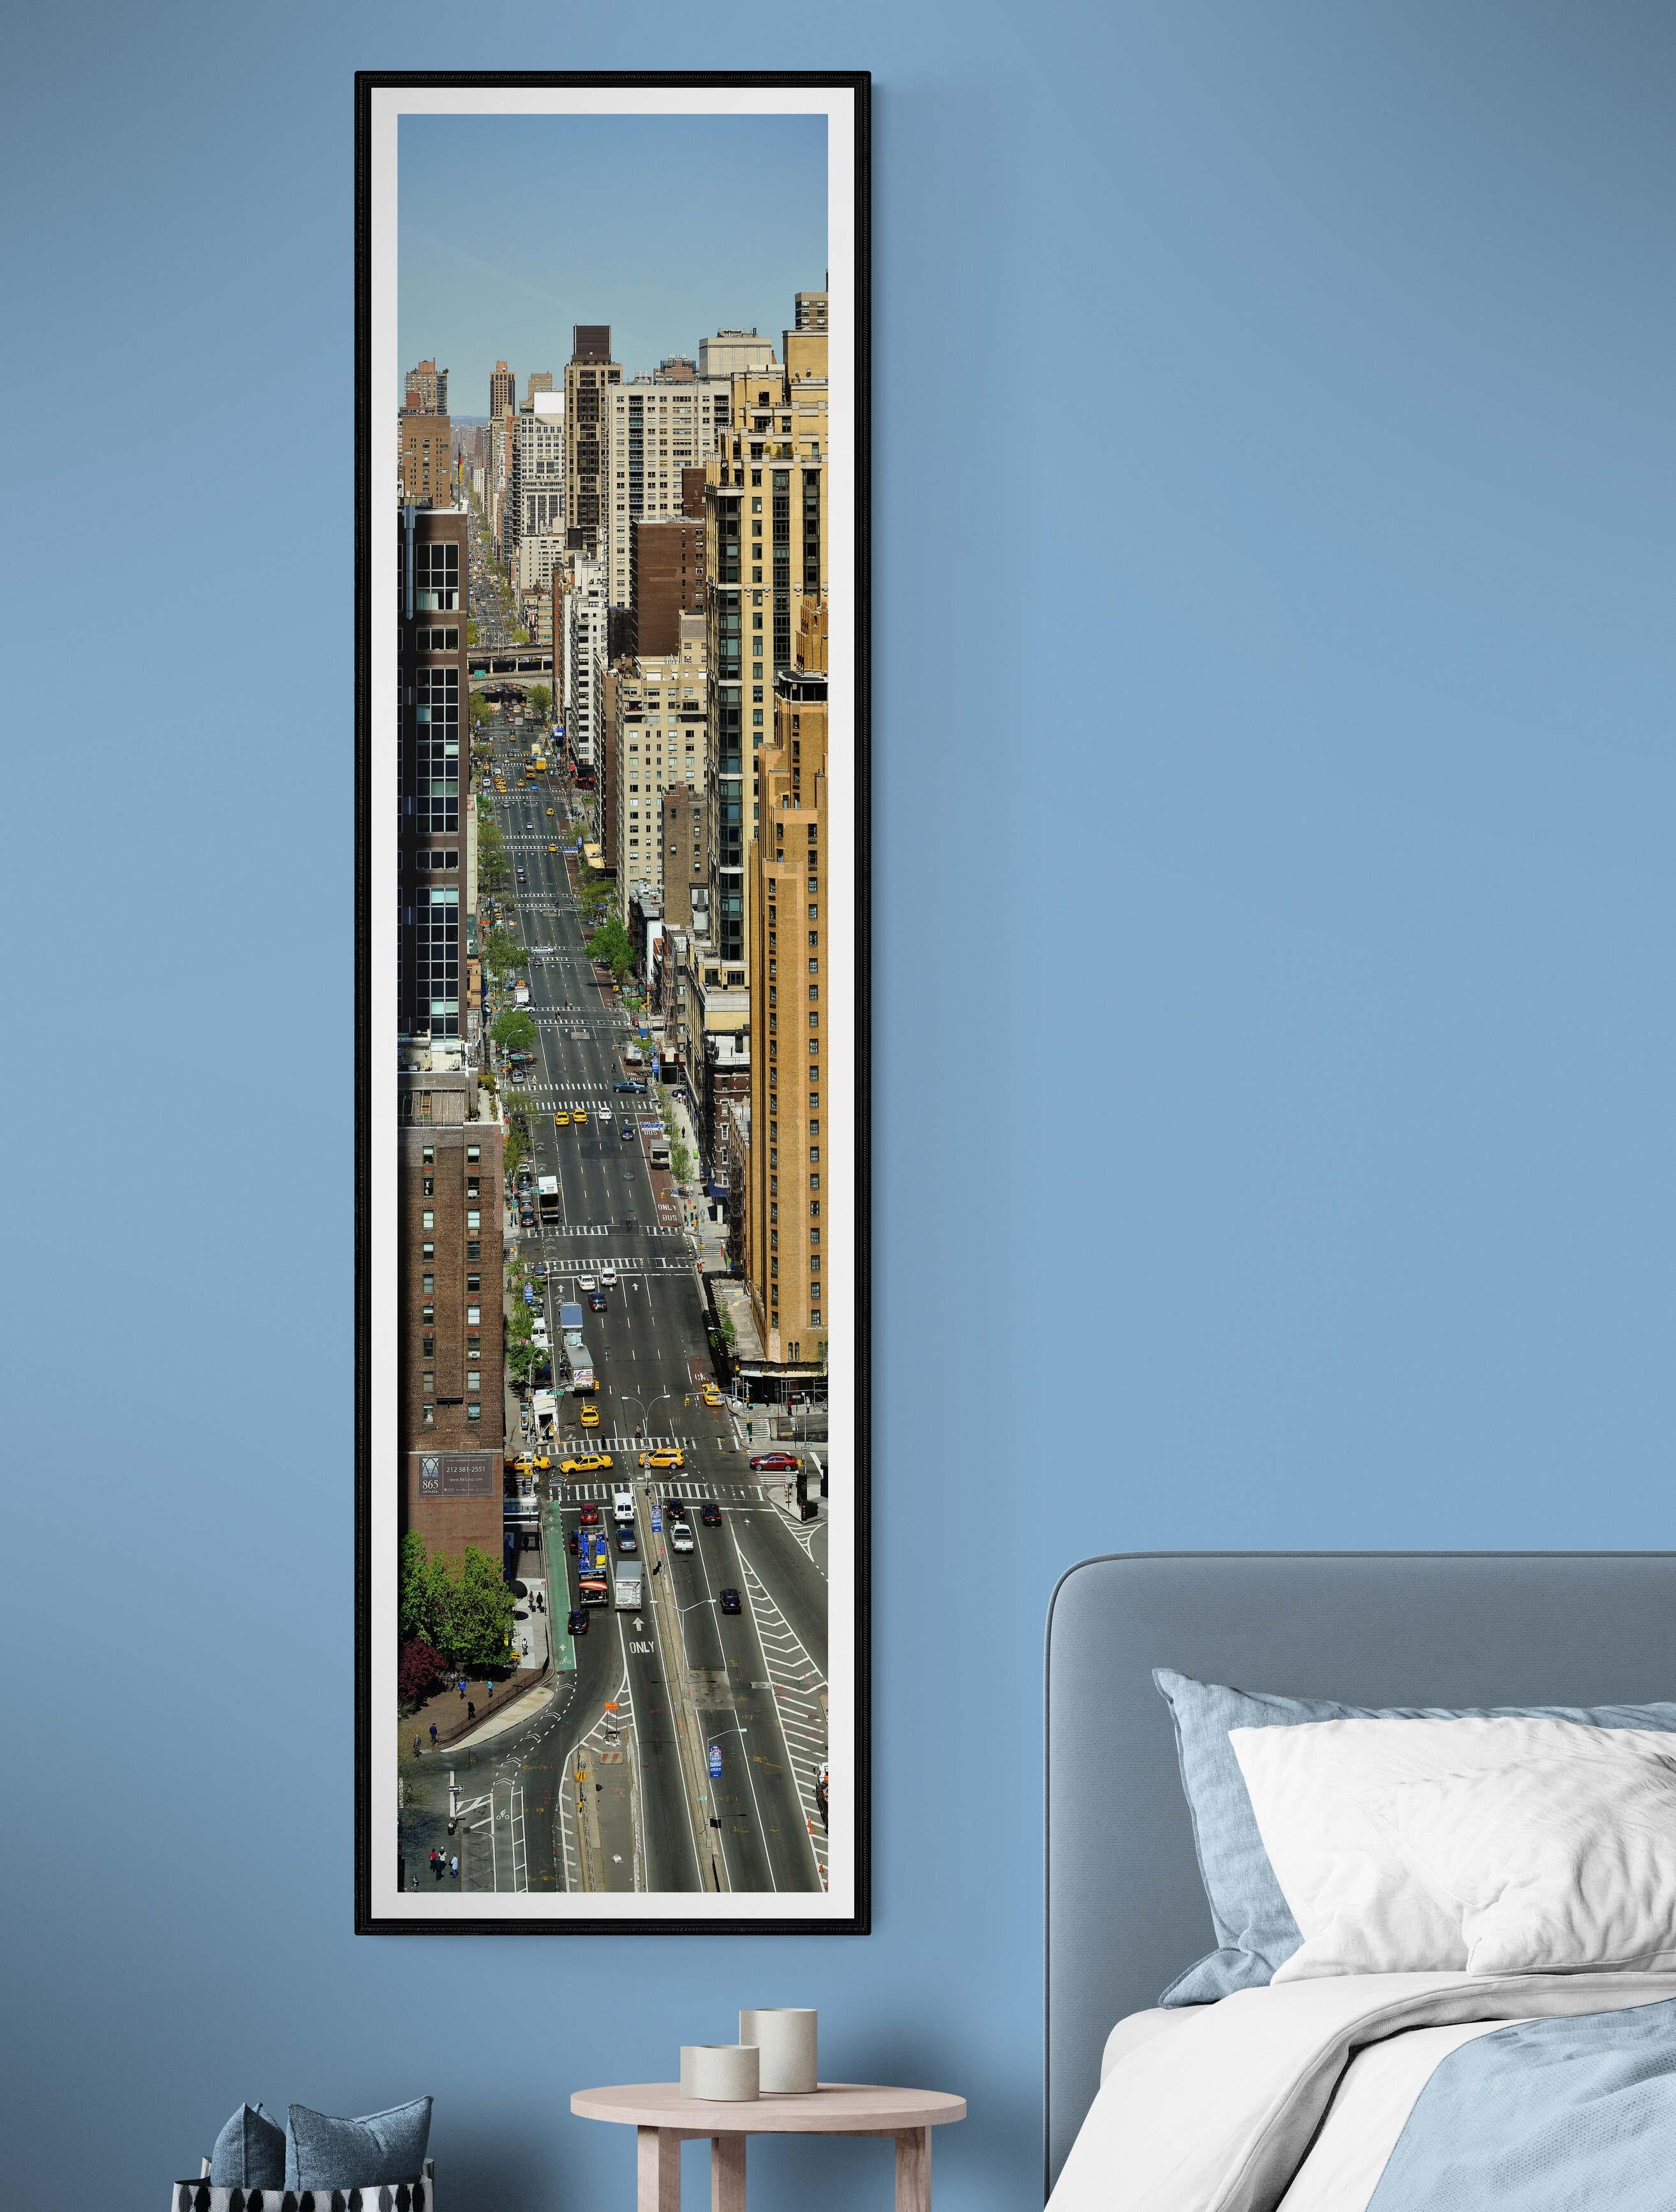 Batman's view of the 1st Avenue of New York City  -  Panoramic Color Photography For Sale 2